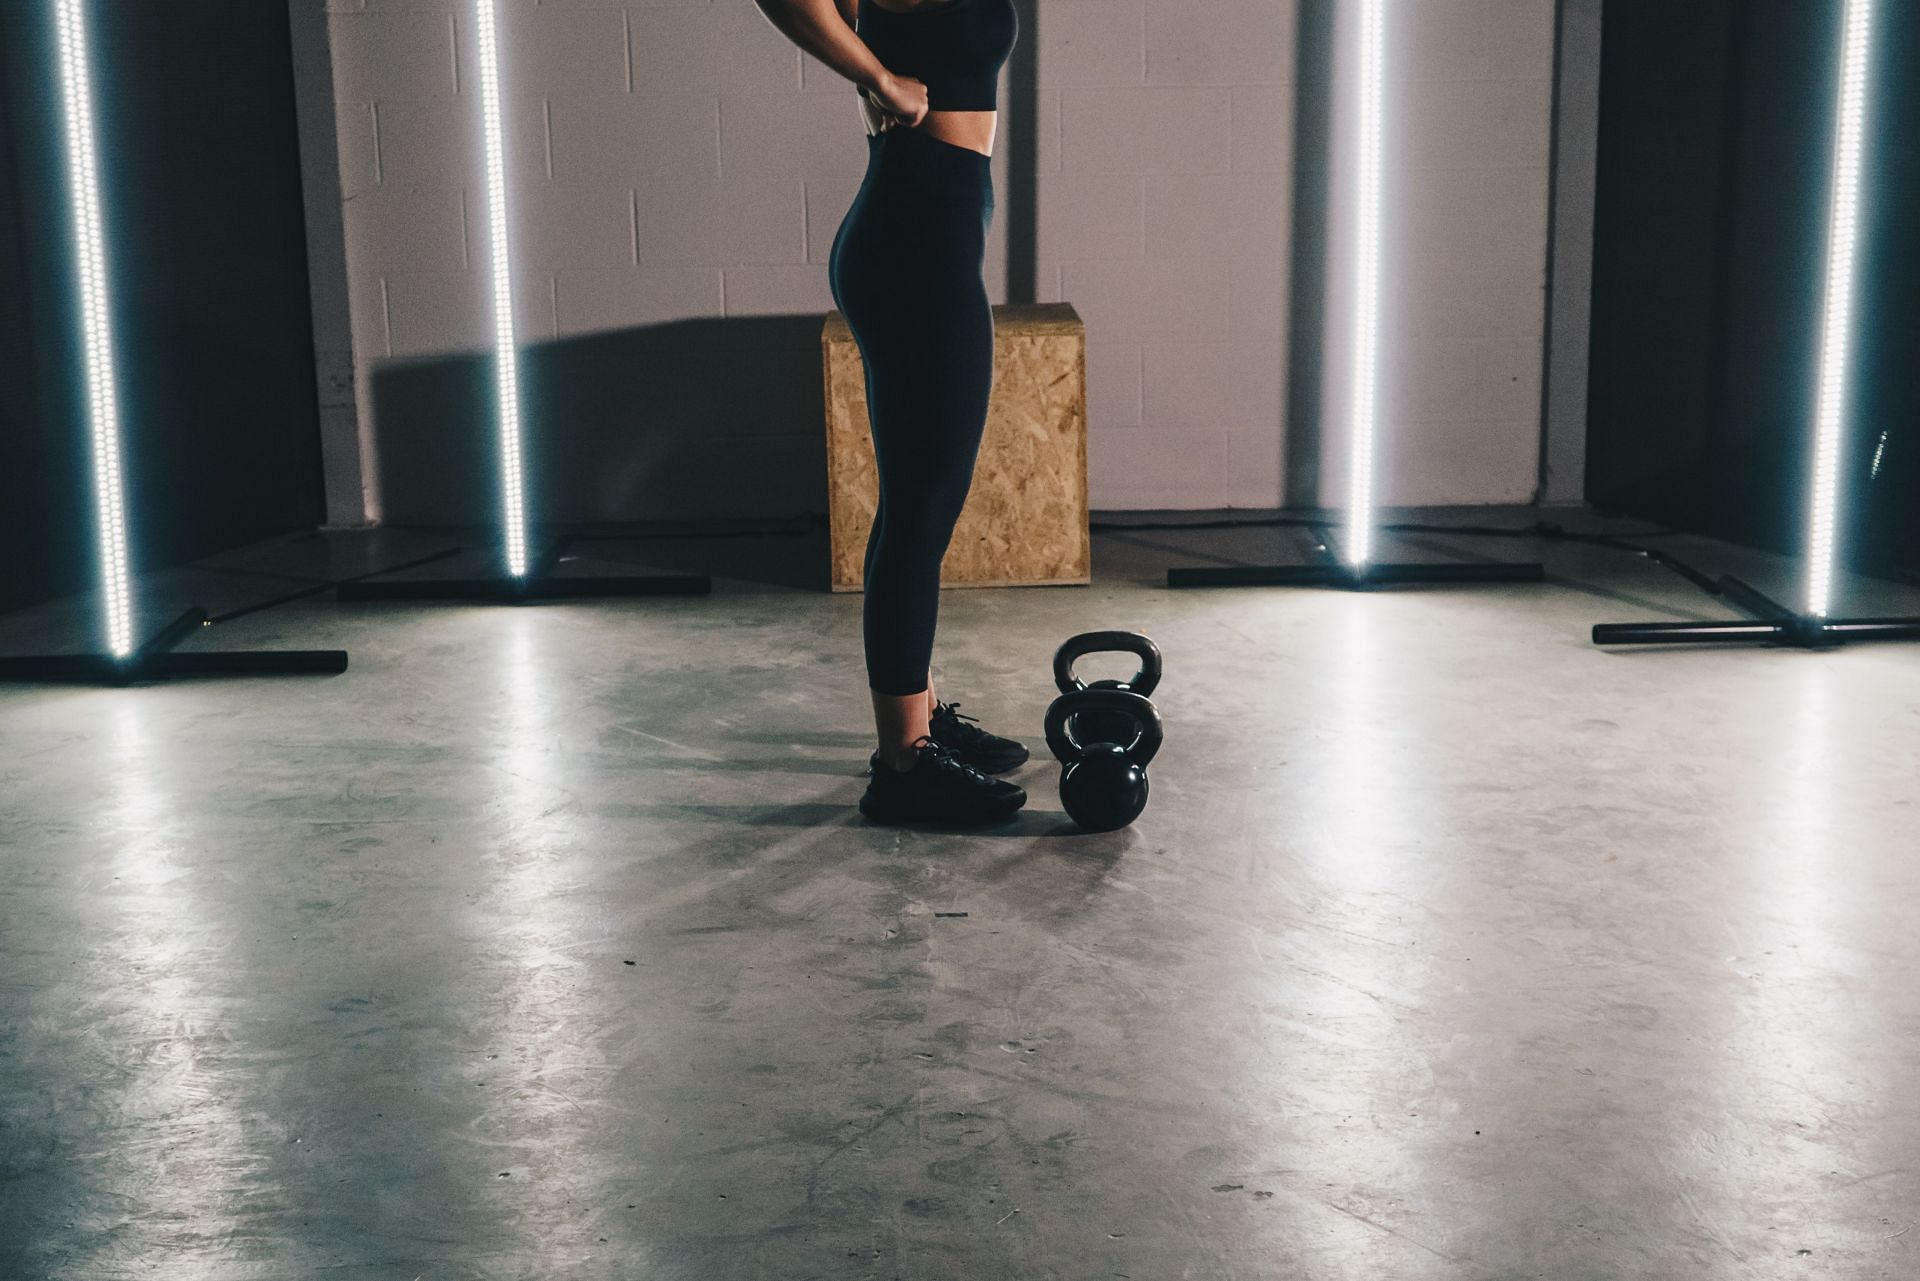 Plie squats are a variation of the traditional squat (Photo by Ambitious Creative Co. - Rick Barrett on Unsplash)